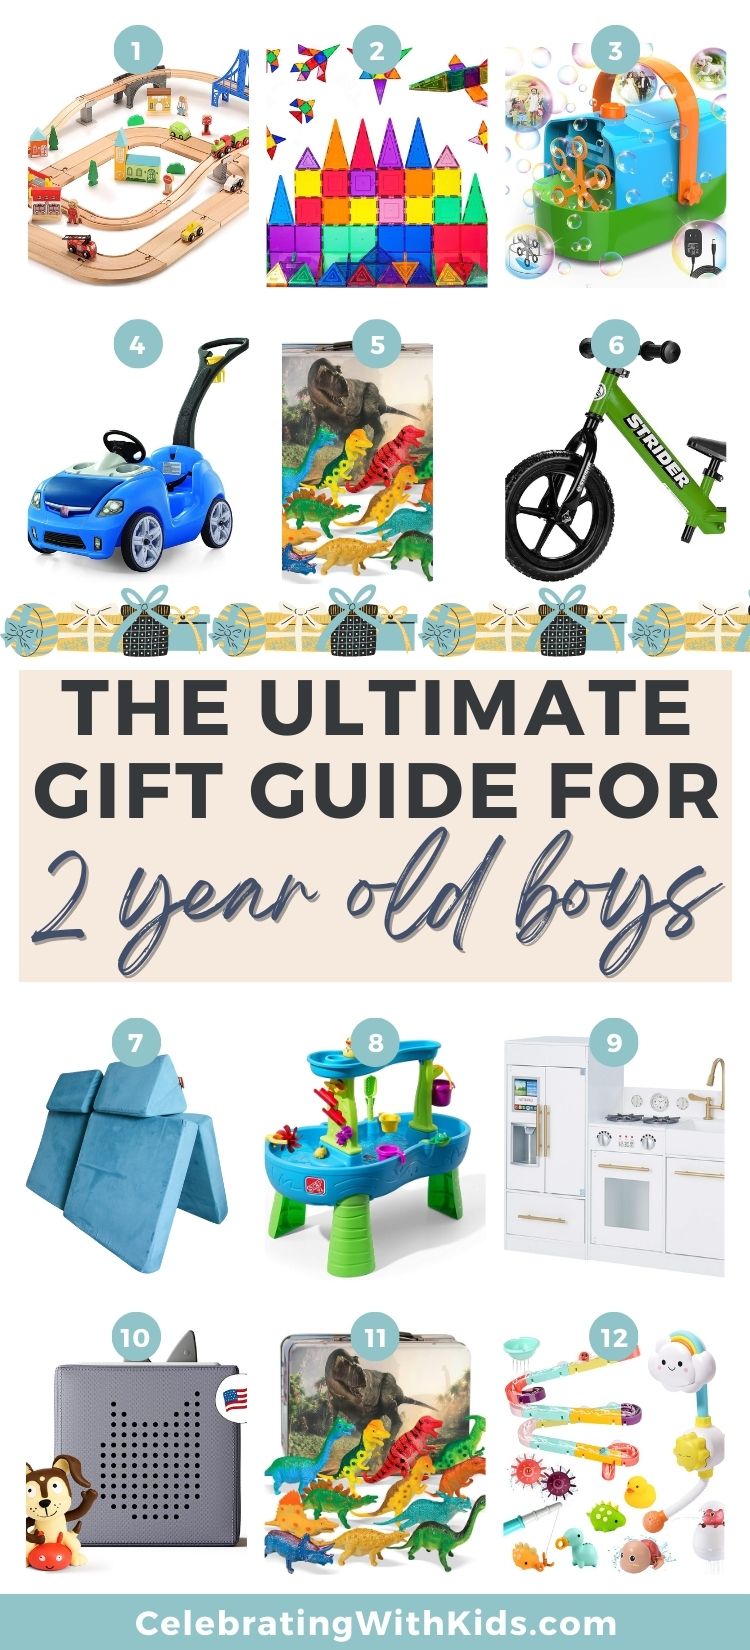 H.A.G.'s Best Gifts for Little Boys - Hardly A Goddess